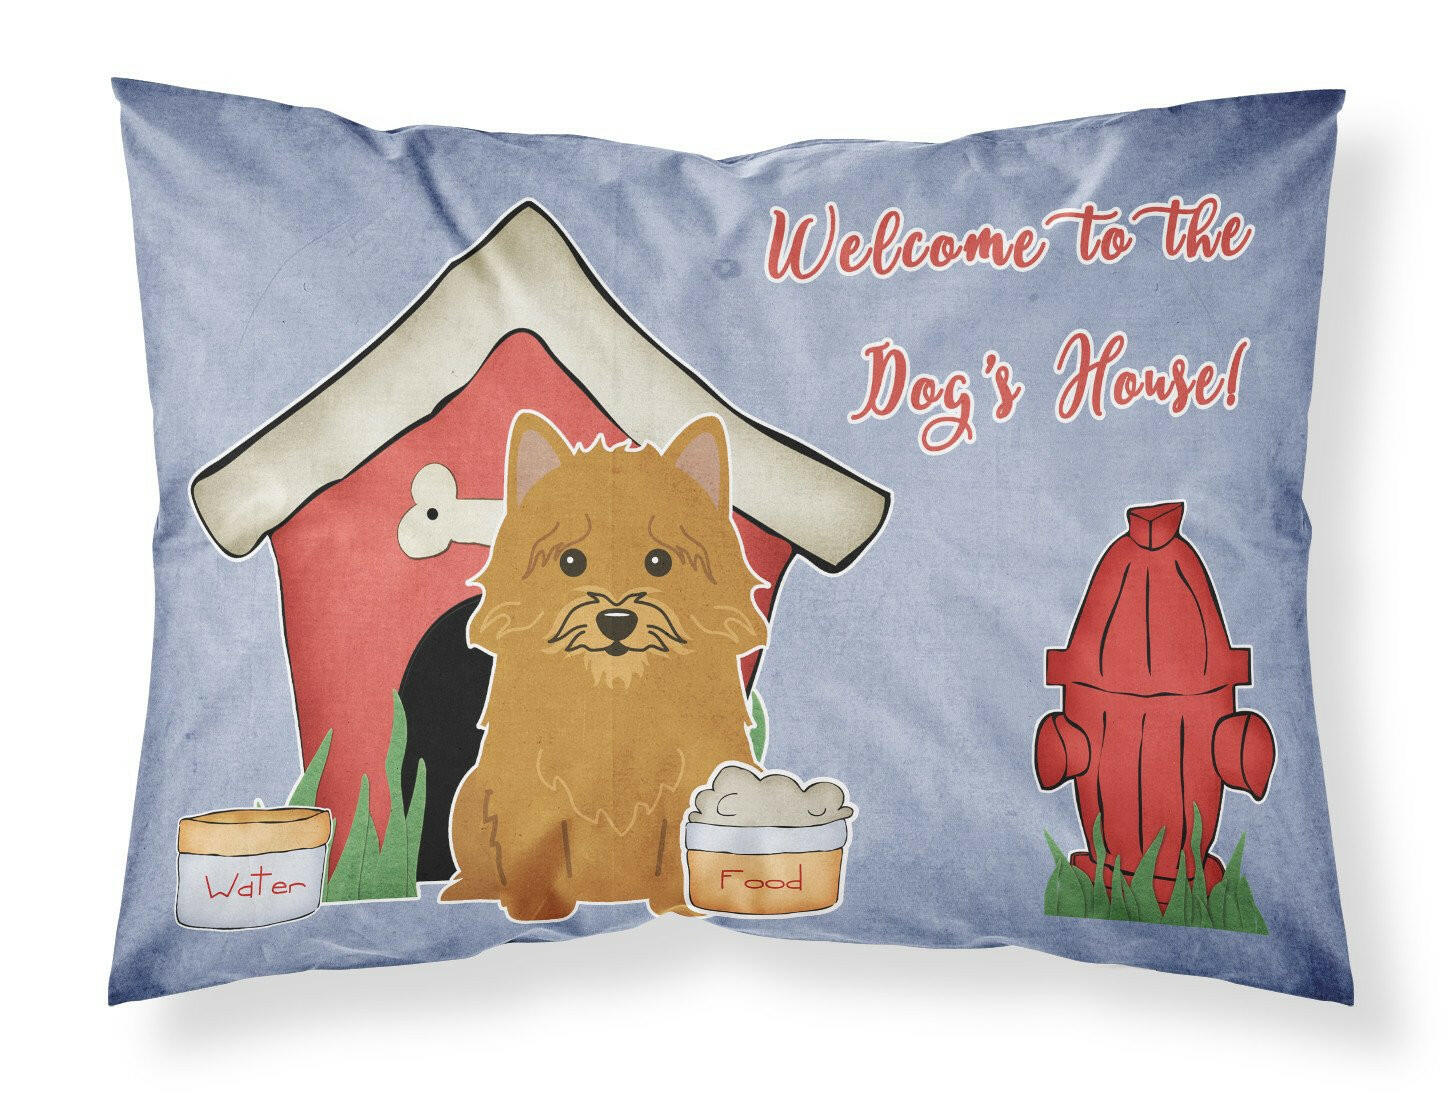 Dog House Collection Norwich Terrier Fabric Standard Pillowcase BB2774PILLOWCASE by Caroline's Treasures